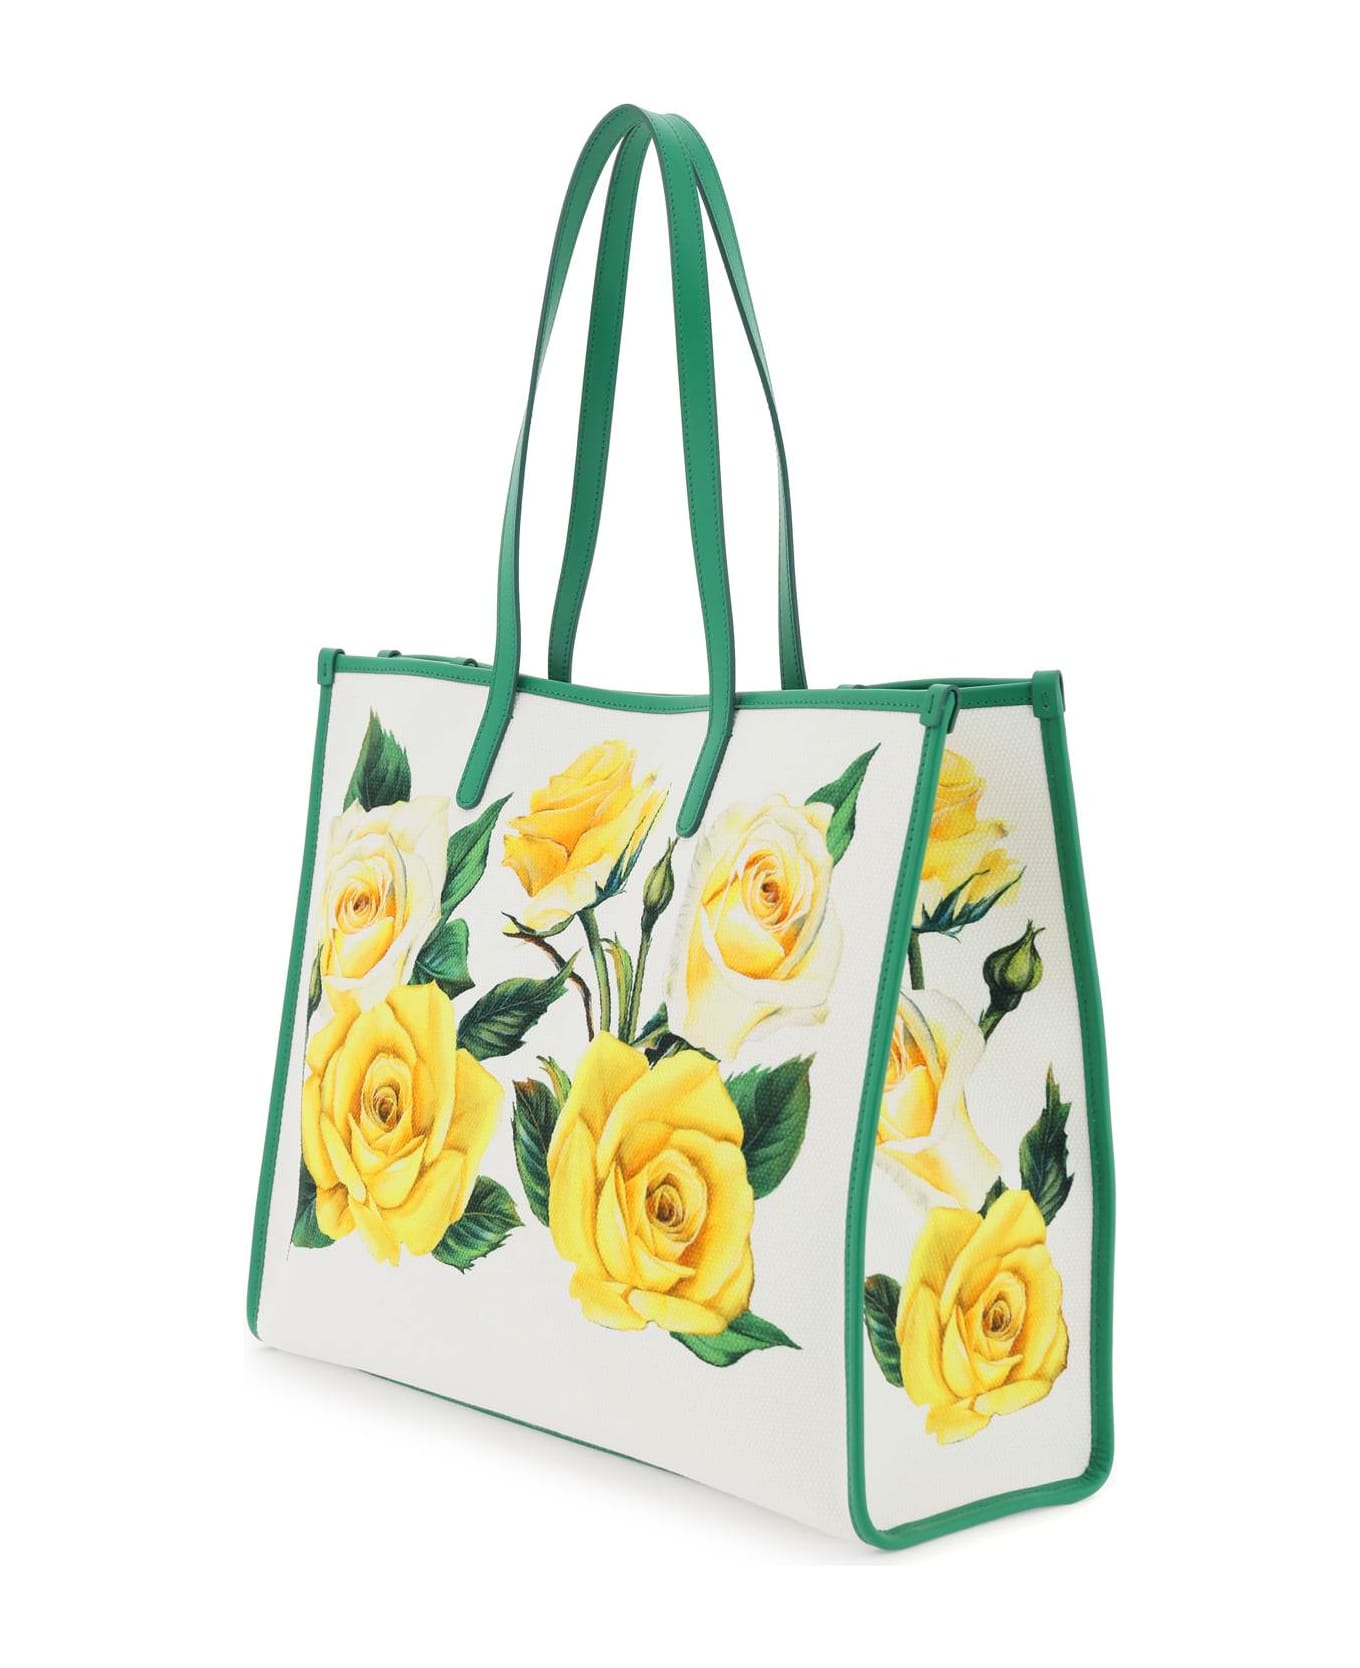 Dolce & Gabbana Tote Bag With Print - ROSE GIALLE FDO BCO (White)